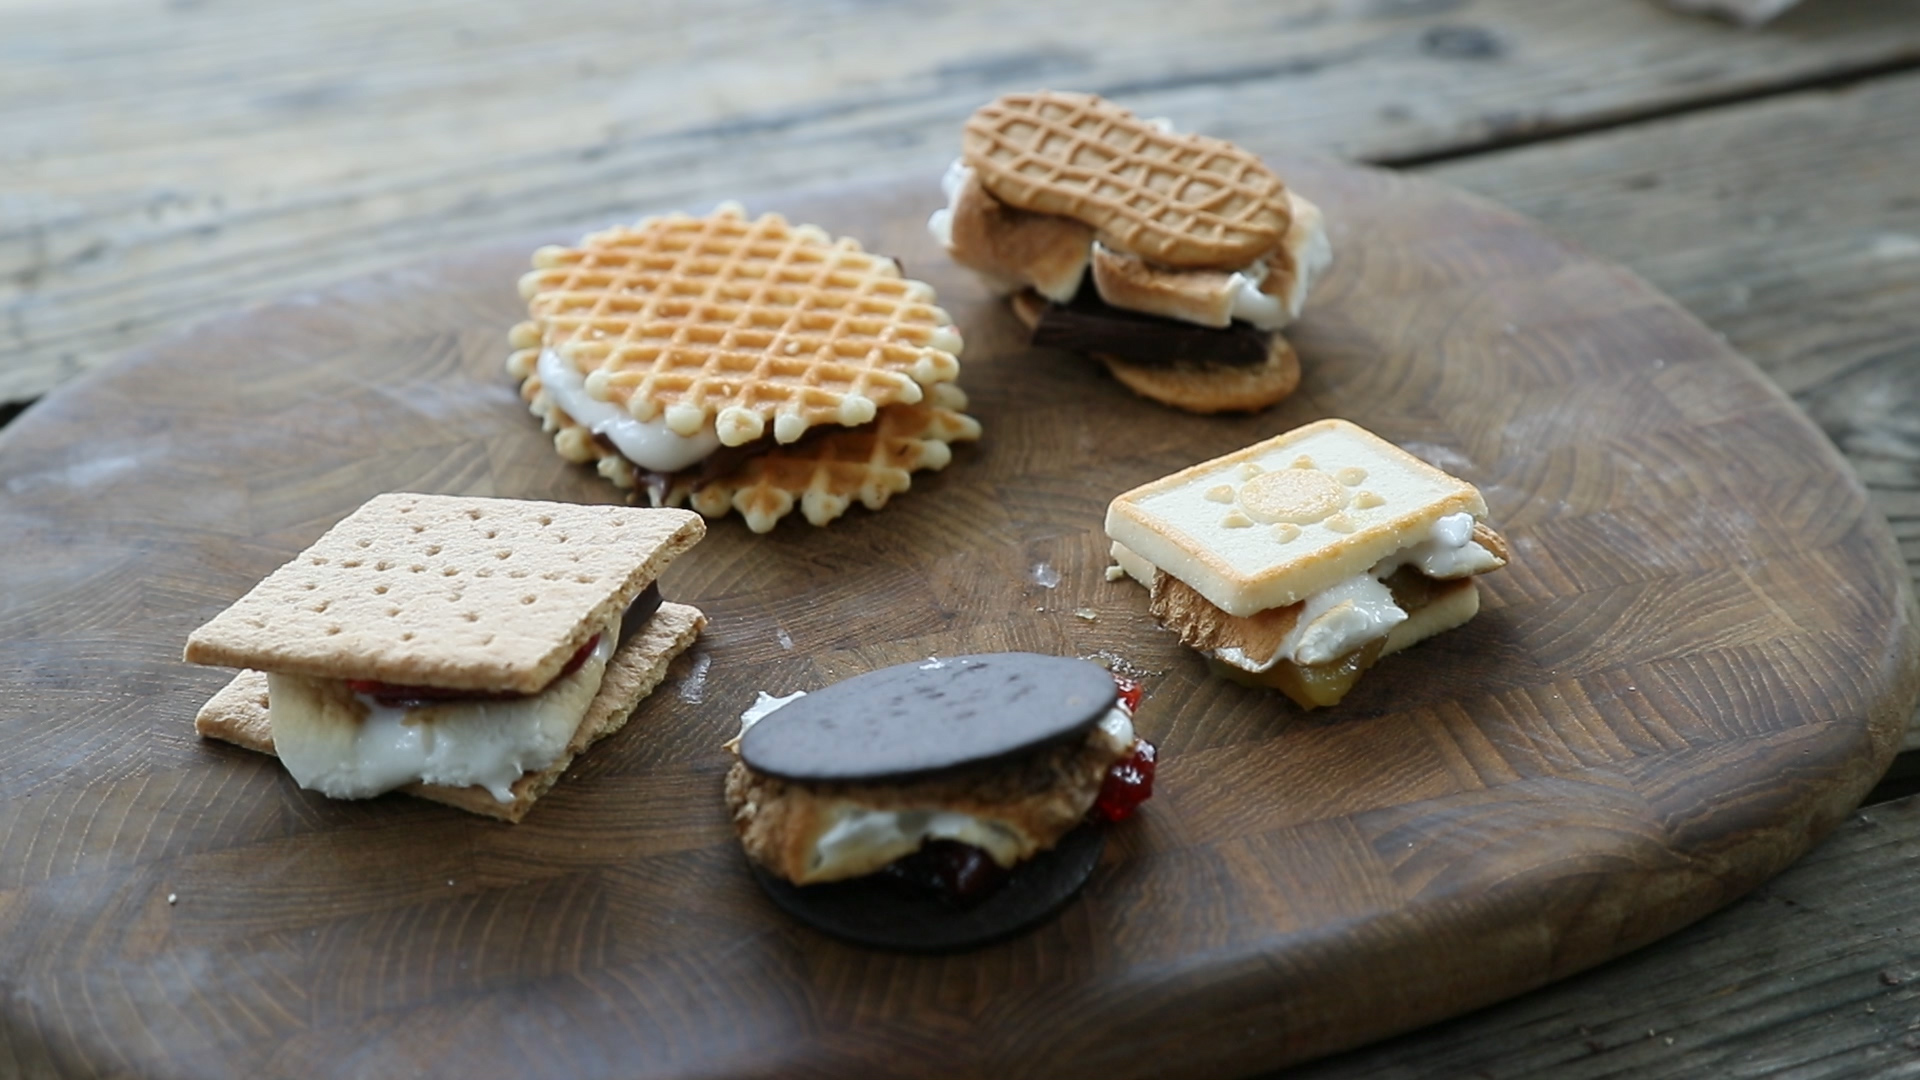 How to Make Gourmet S’mores